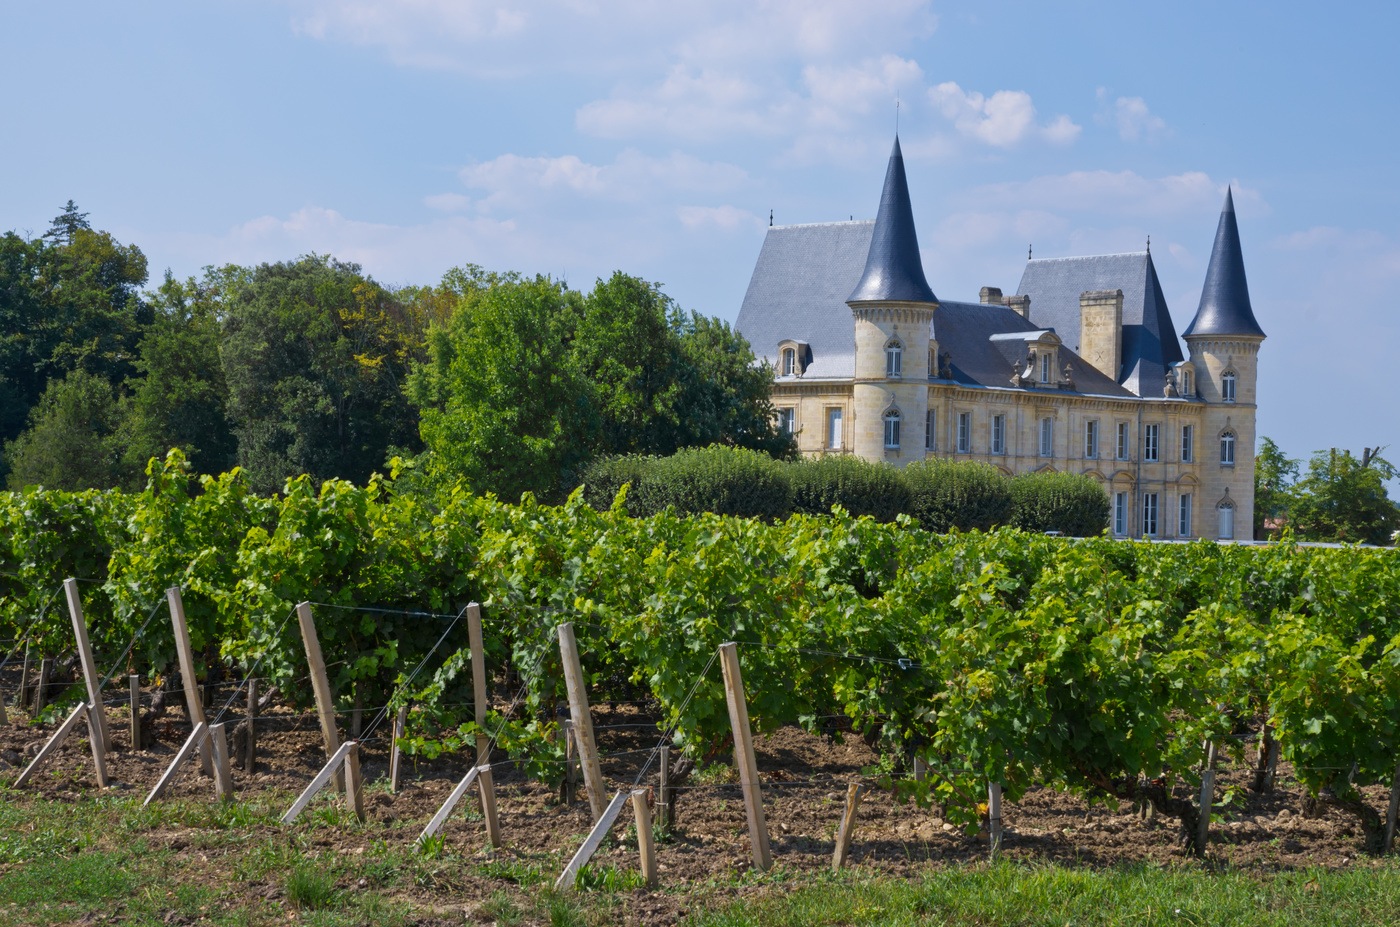 Cheateau in Bordeaux wine region with a vineyard in the foreground